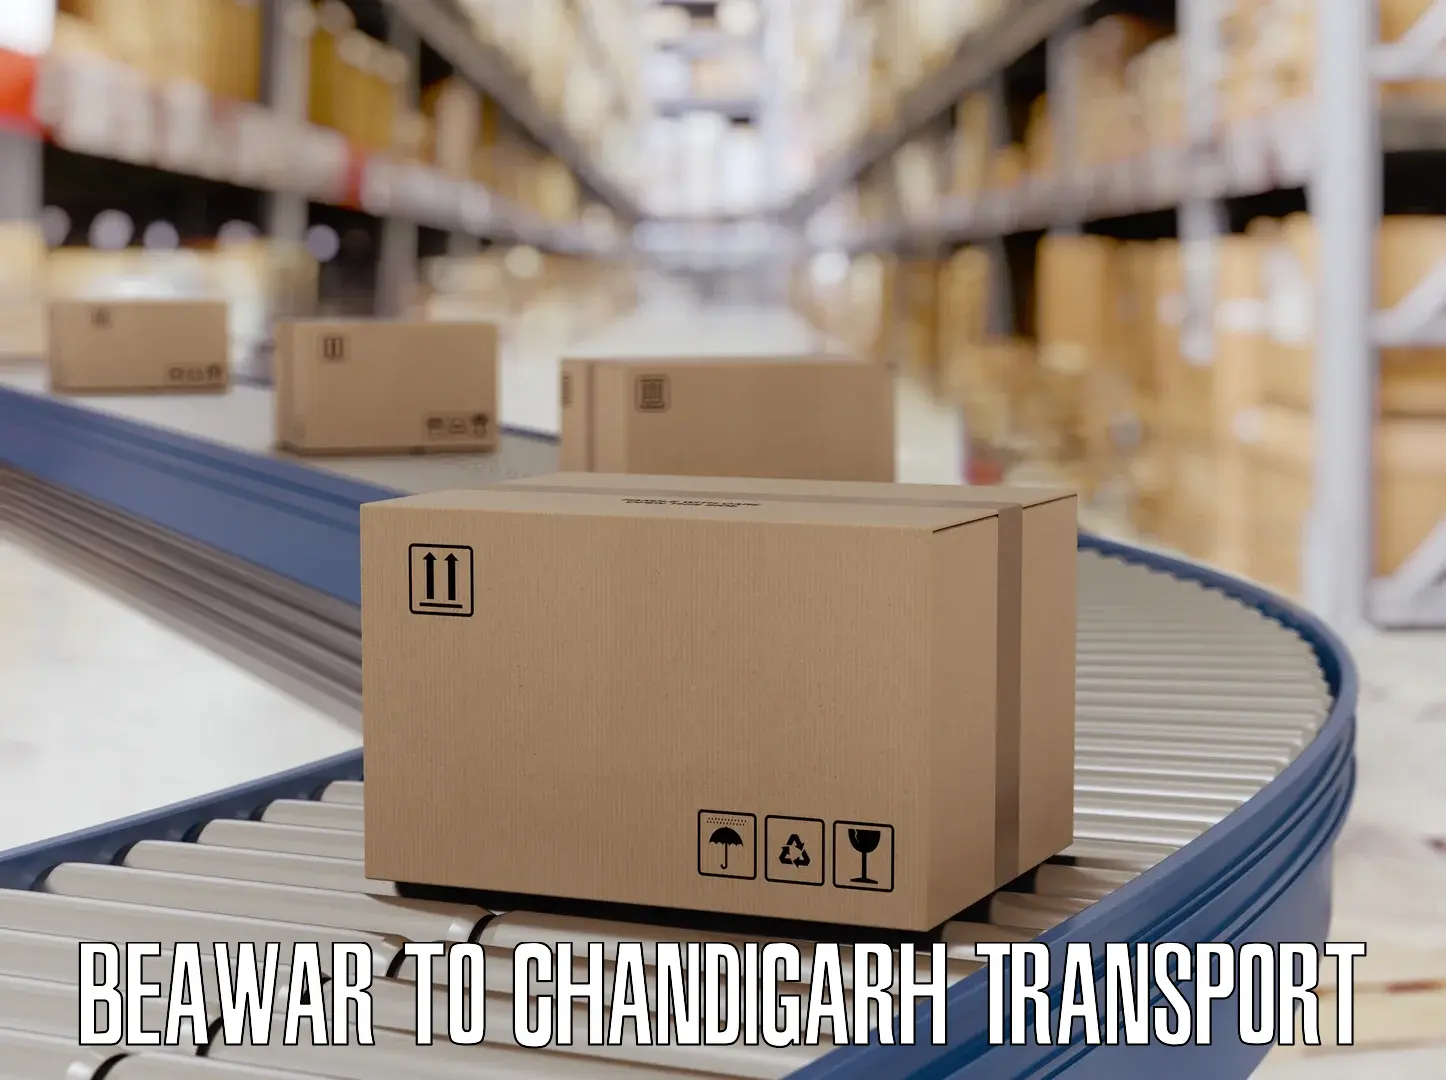 Vehicle transport services Beawar to Chandigarh